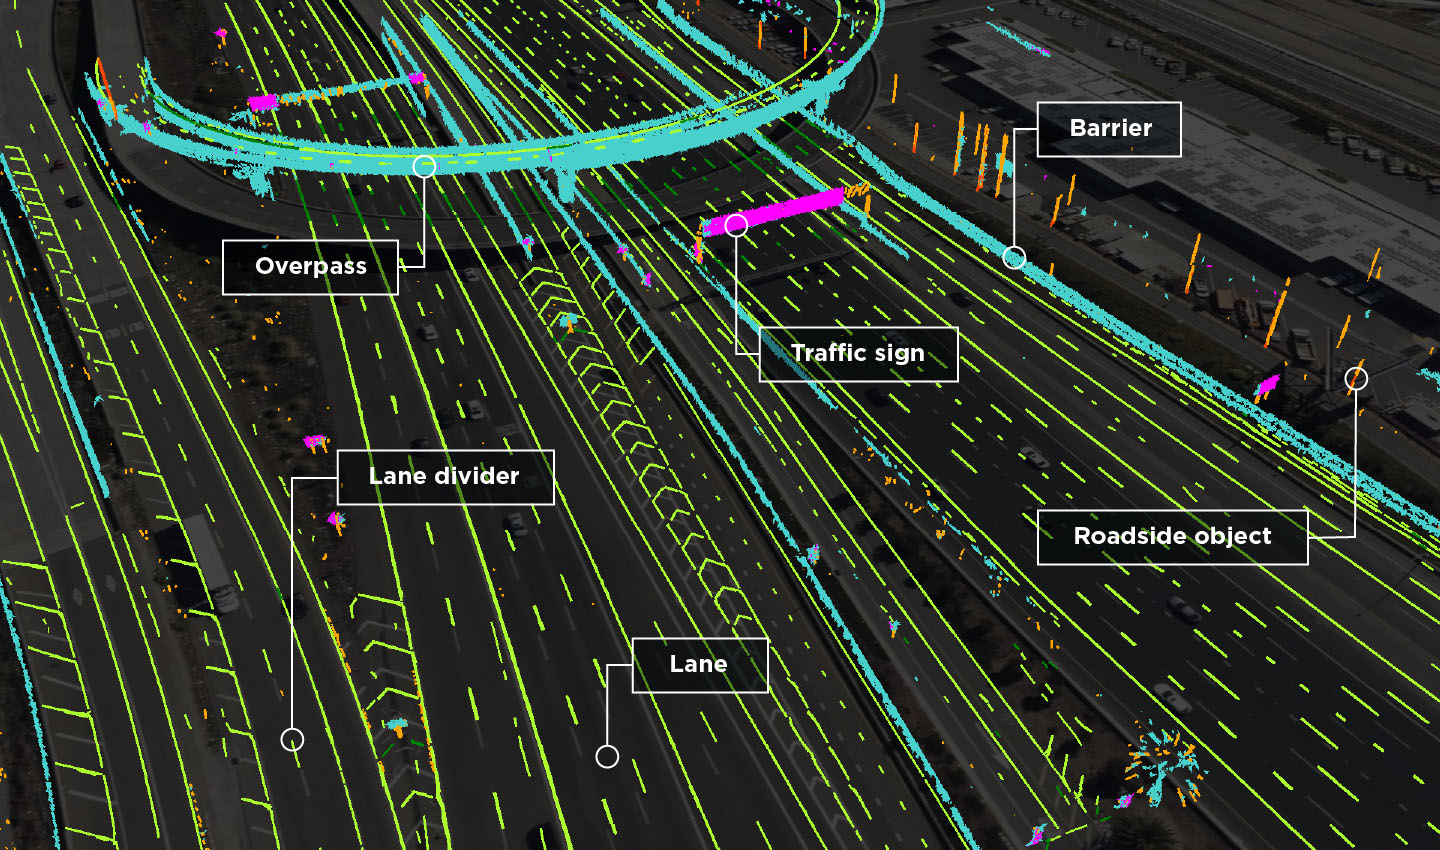 By using mobile mapping images iRAP can build an understanding of road quality, highlighting to authorities where infrastructure can be improved.